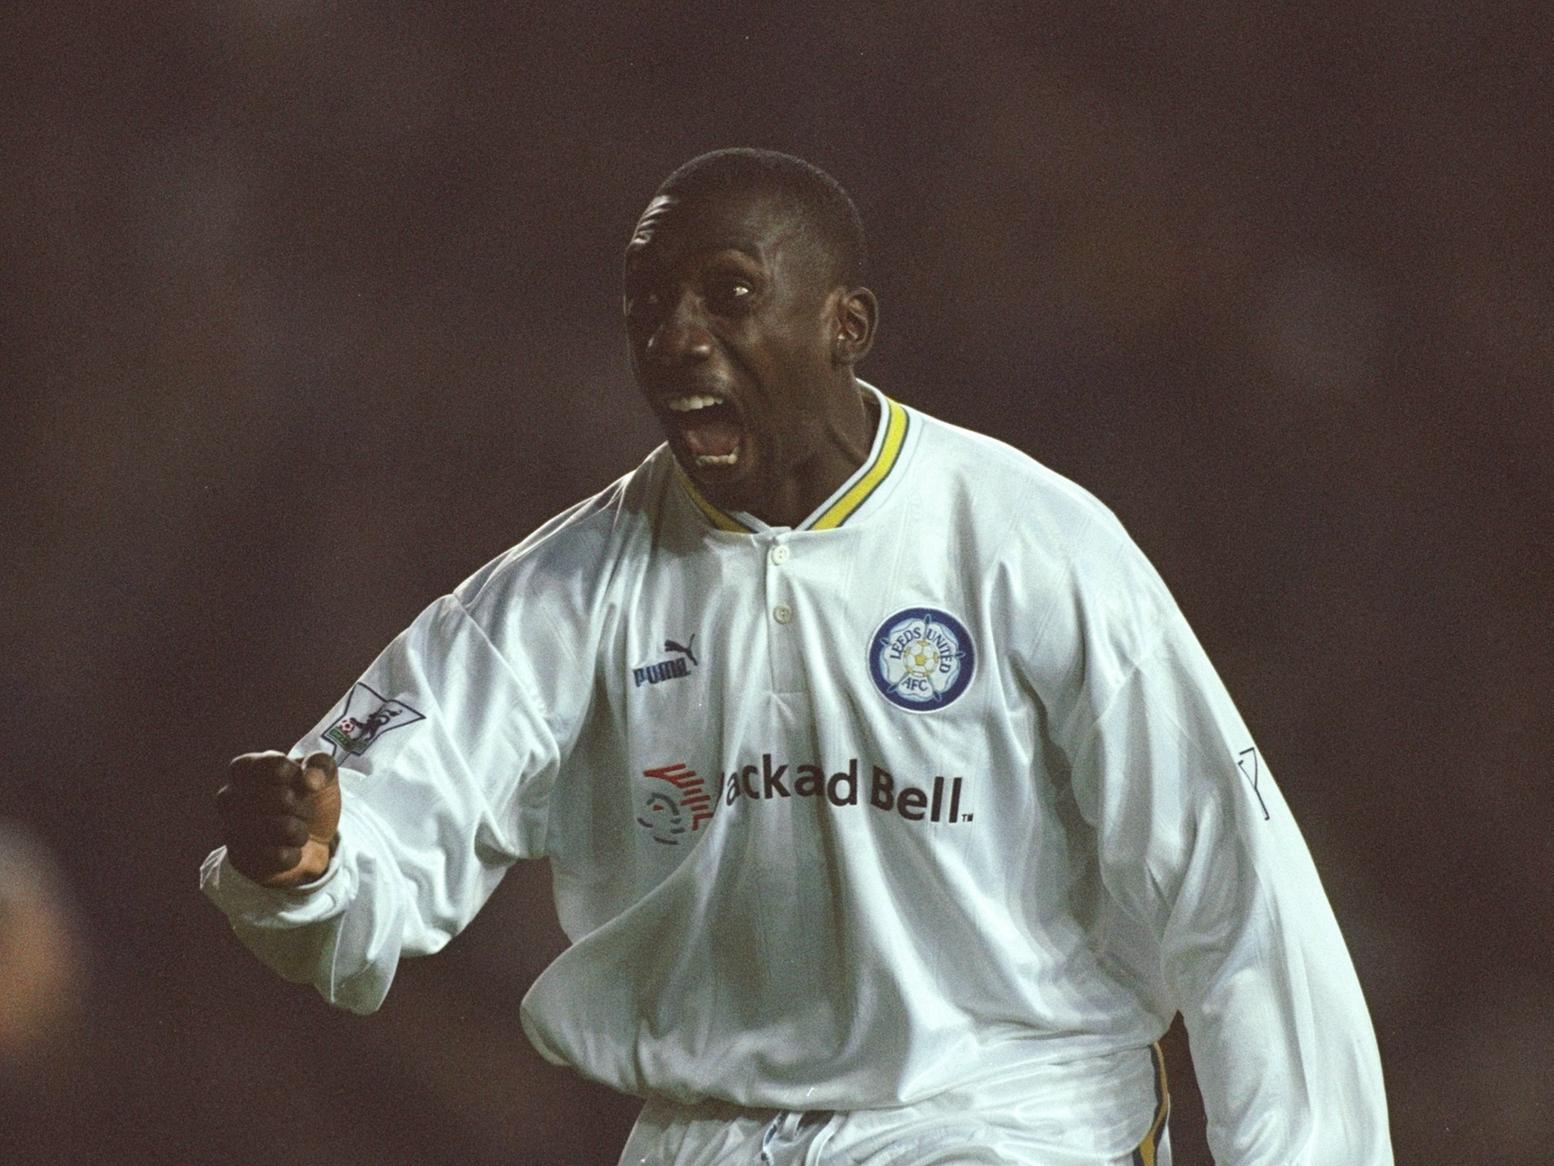 Hasselbaink's 18 goals in 36 appearances made him joint-winner of the Premier League Golden Boot in 1998/99 as Leeds finished fourth in the league.